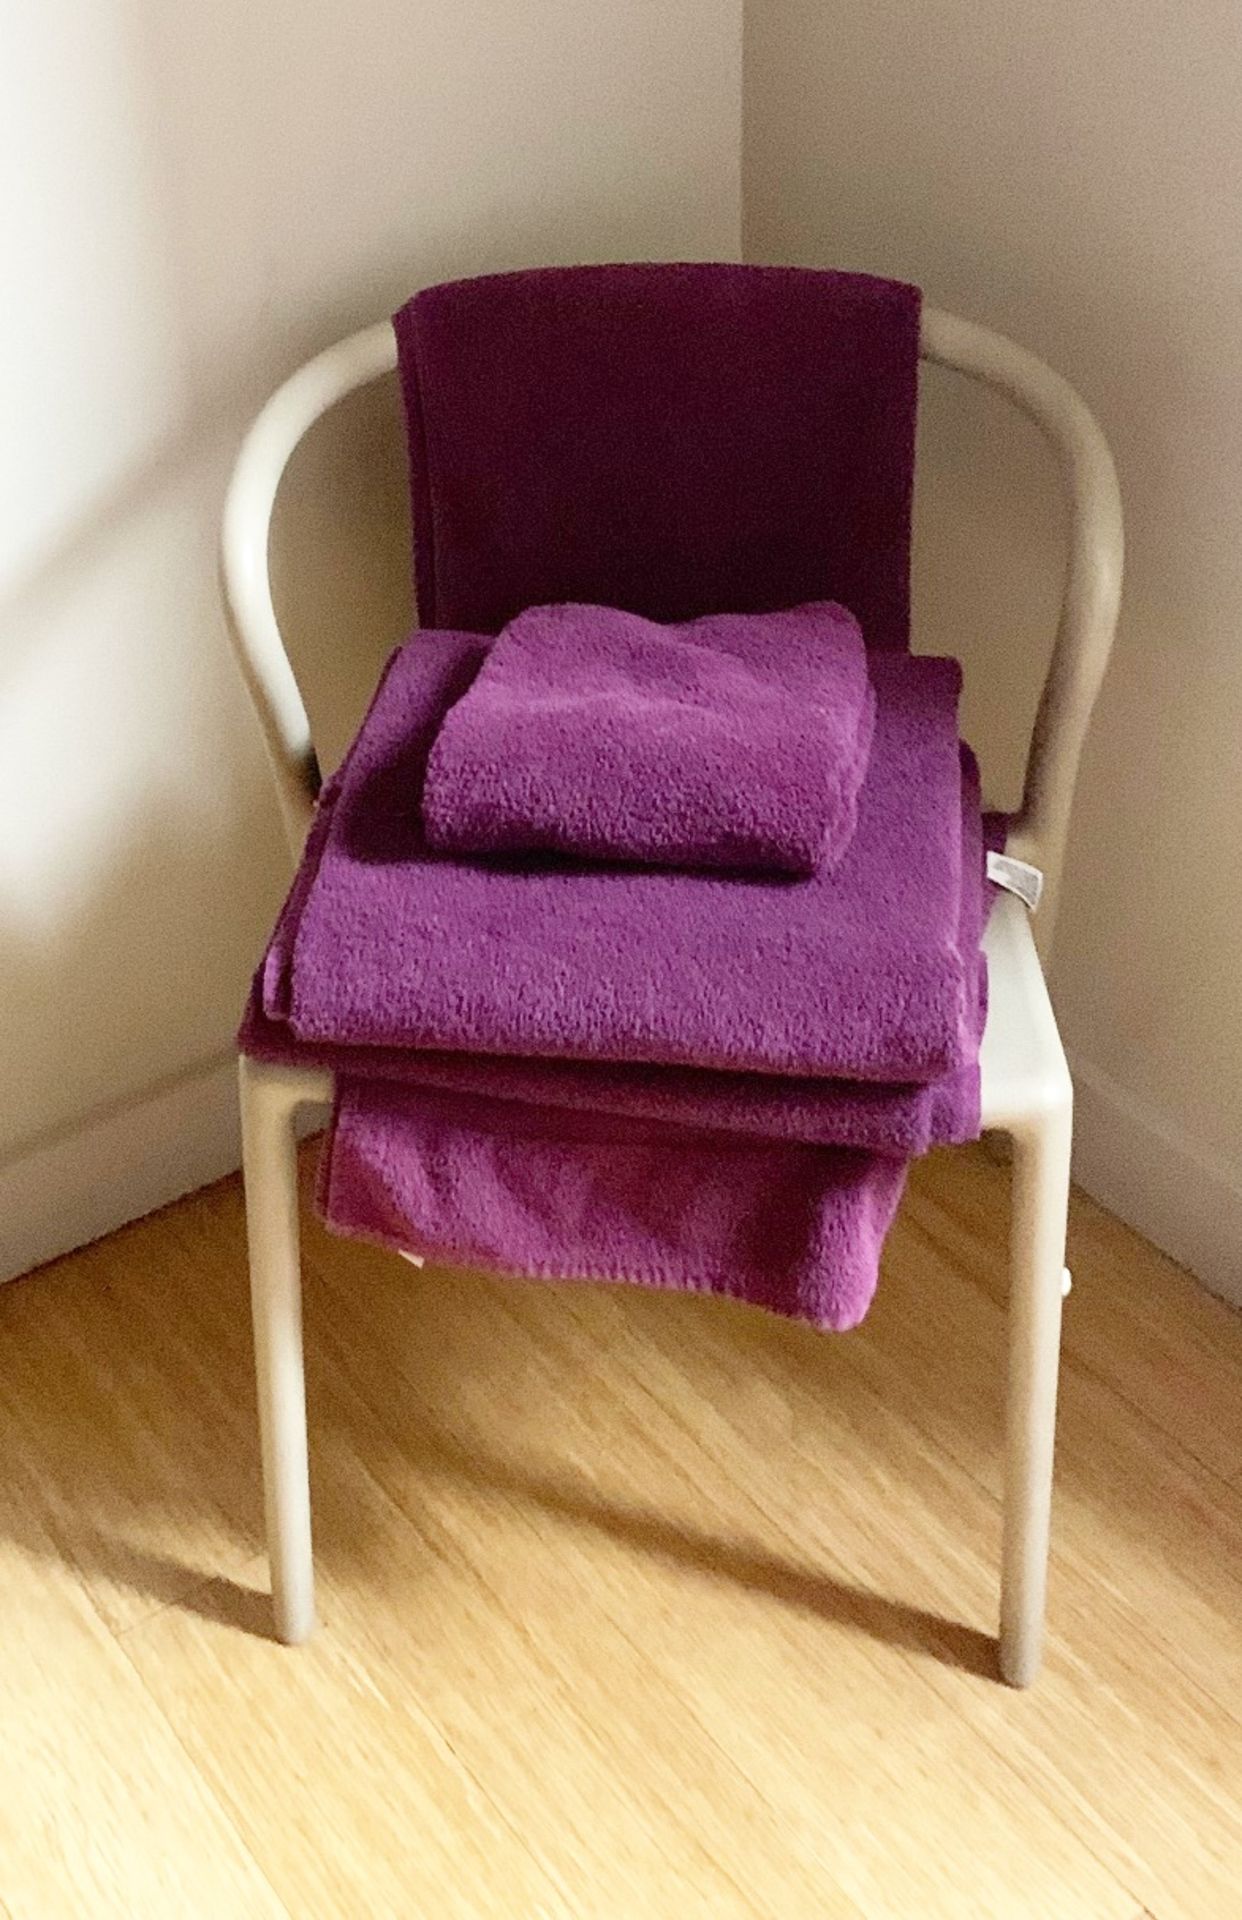 20 x Majestic Luxury 620gsm Bath Towels in Purple - Size MEDIUM - RRP £190 - CL587 - Location: - Image 2 of 4